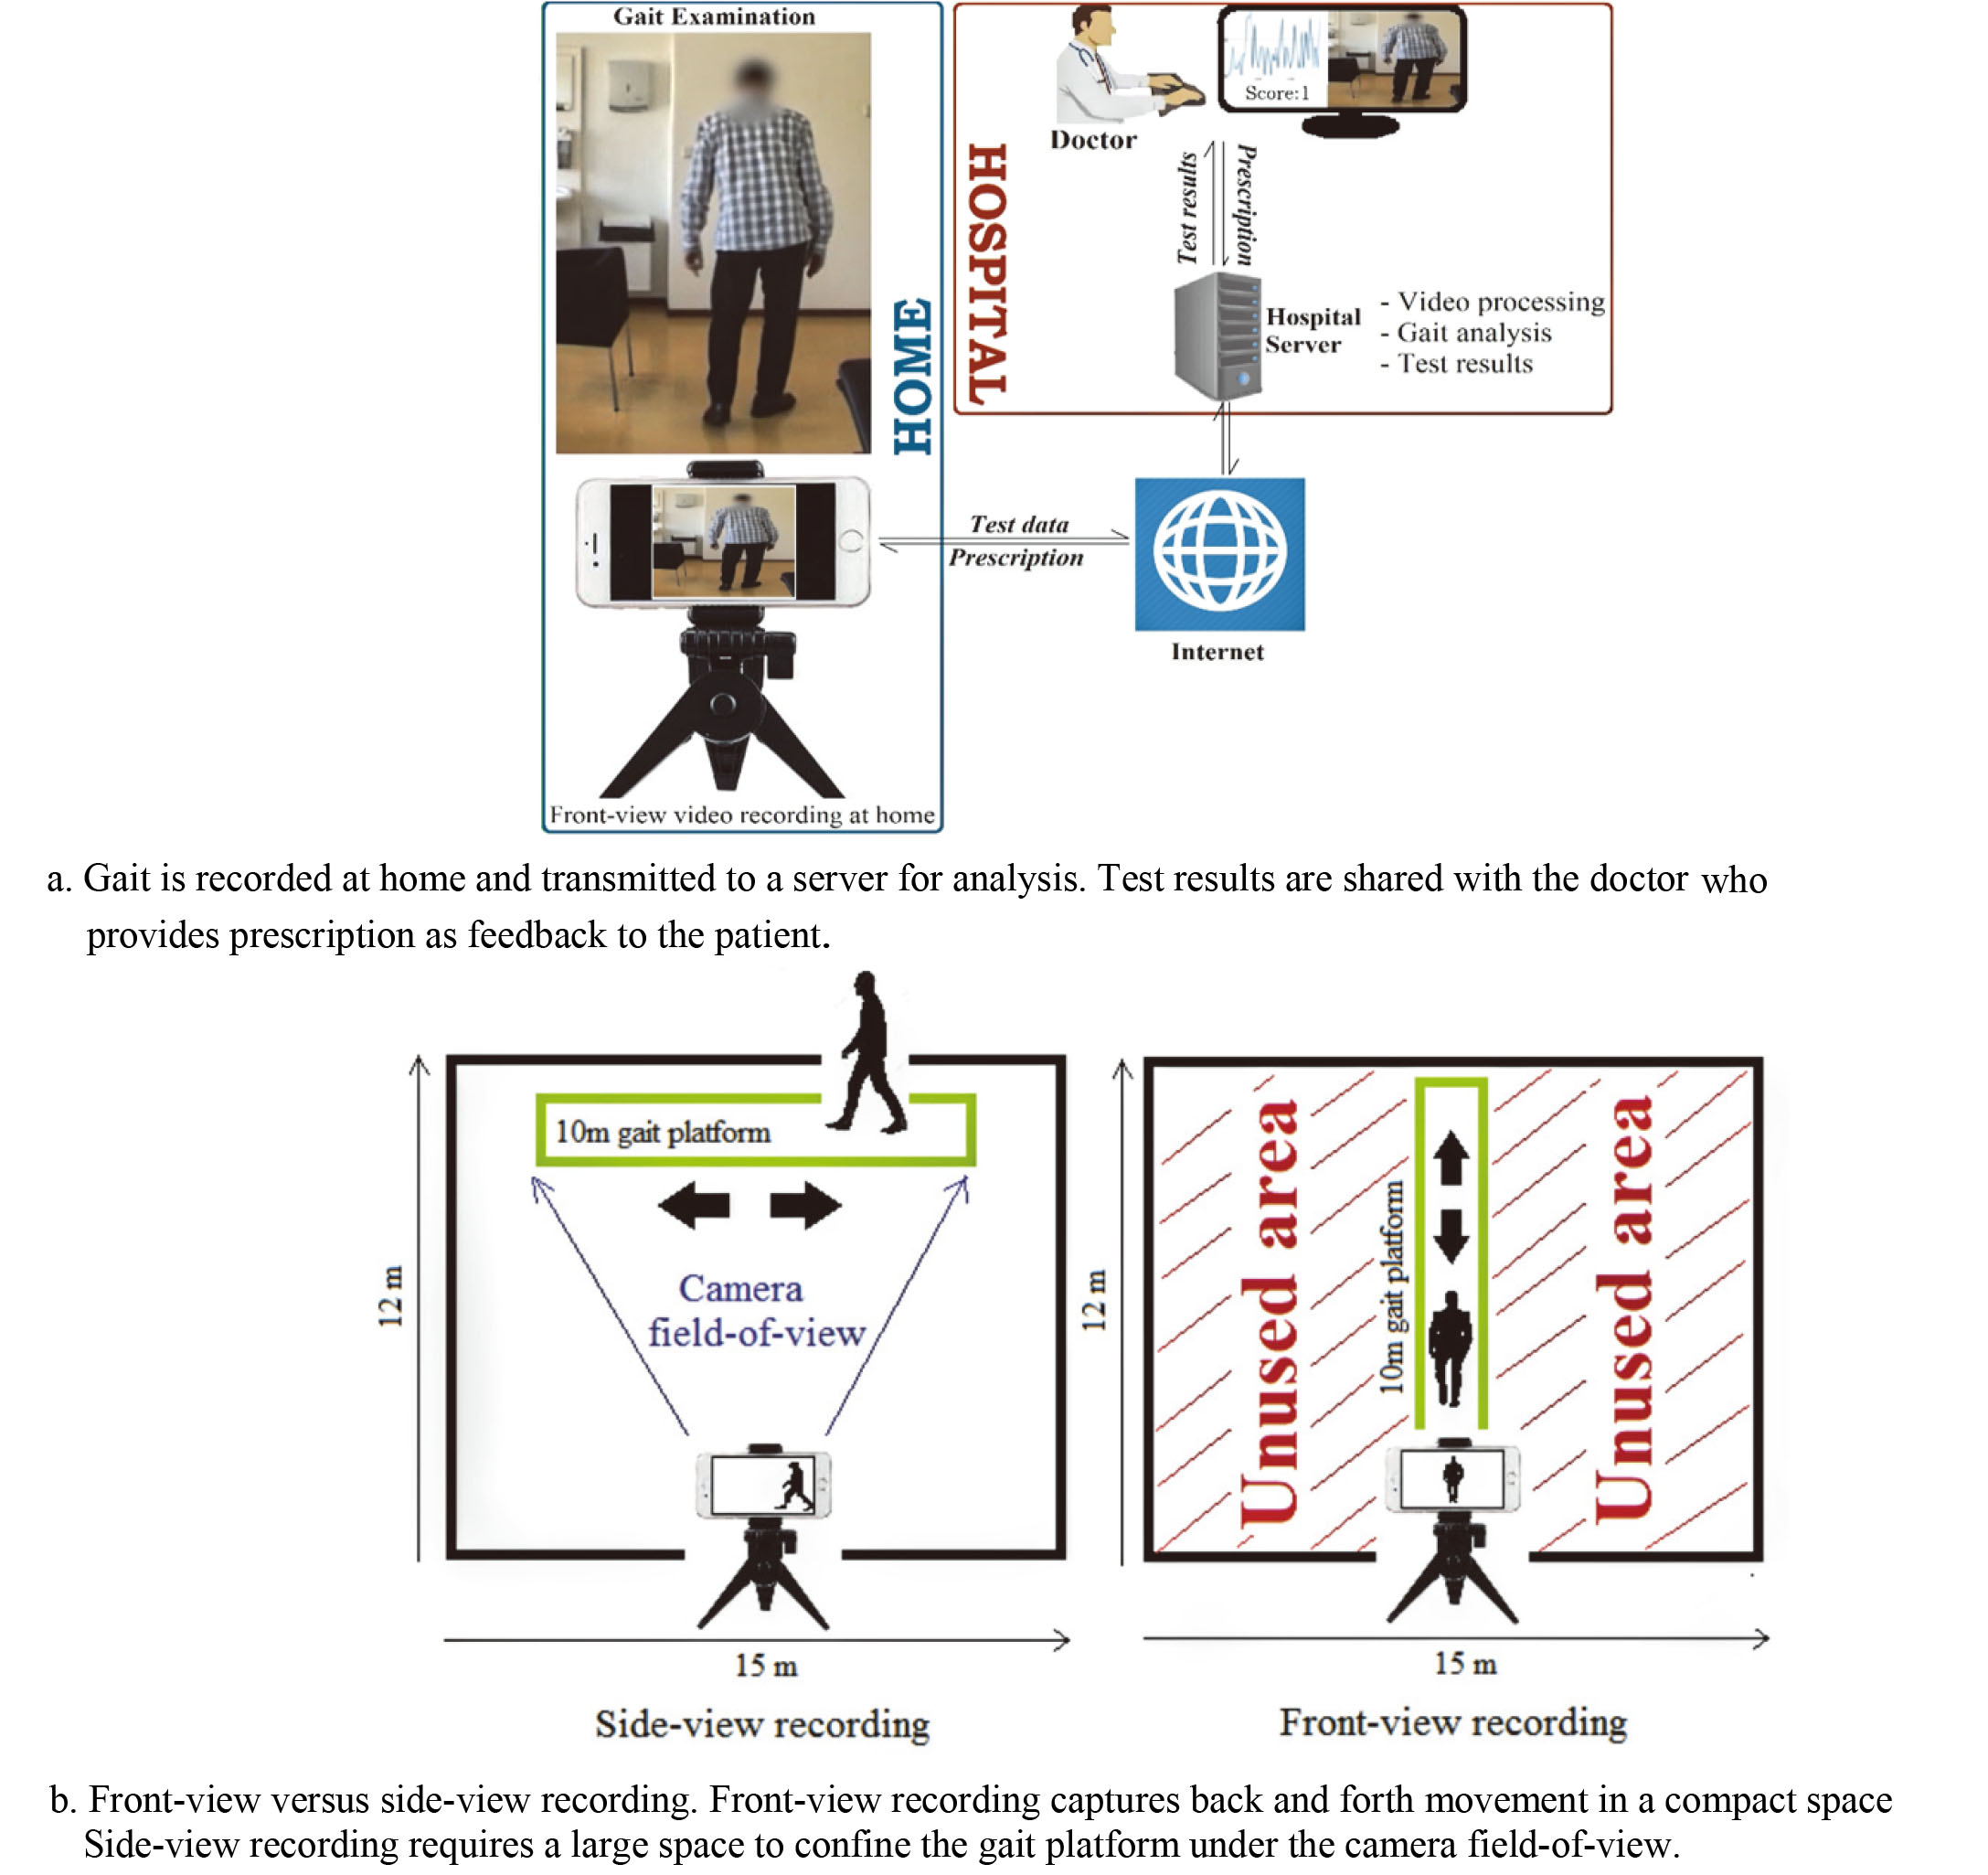 At-home gait assessment based on front-view video analysis.